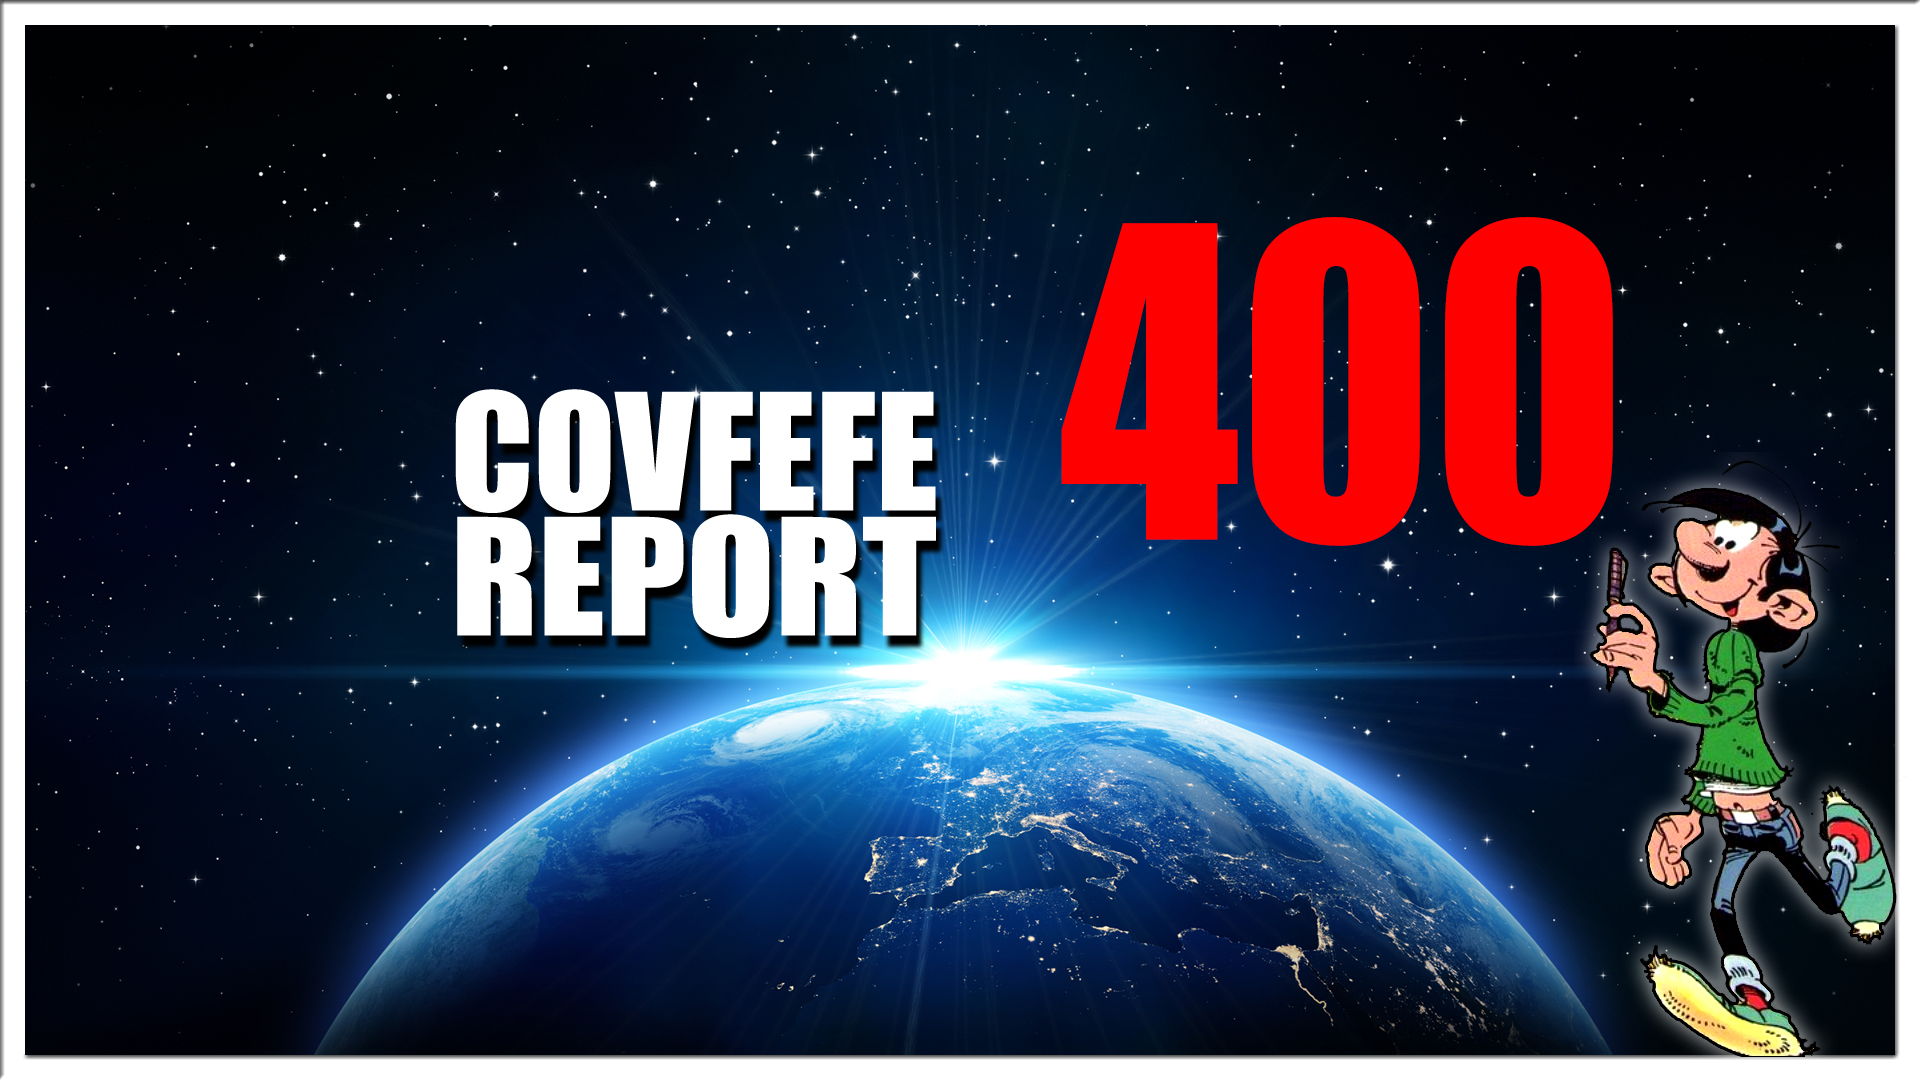 Covfefe Report 400. Who put the Dem in Dementia, Dr. Elens aka Held, ThanQs to all patriots